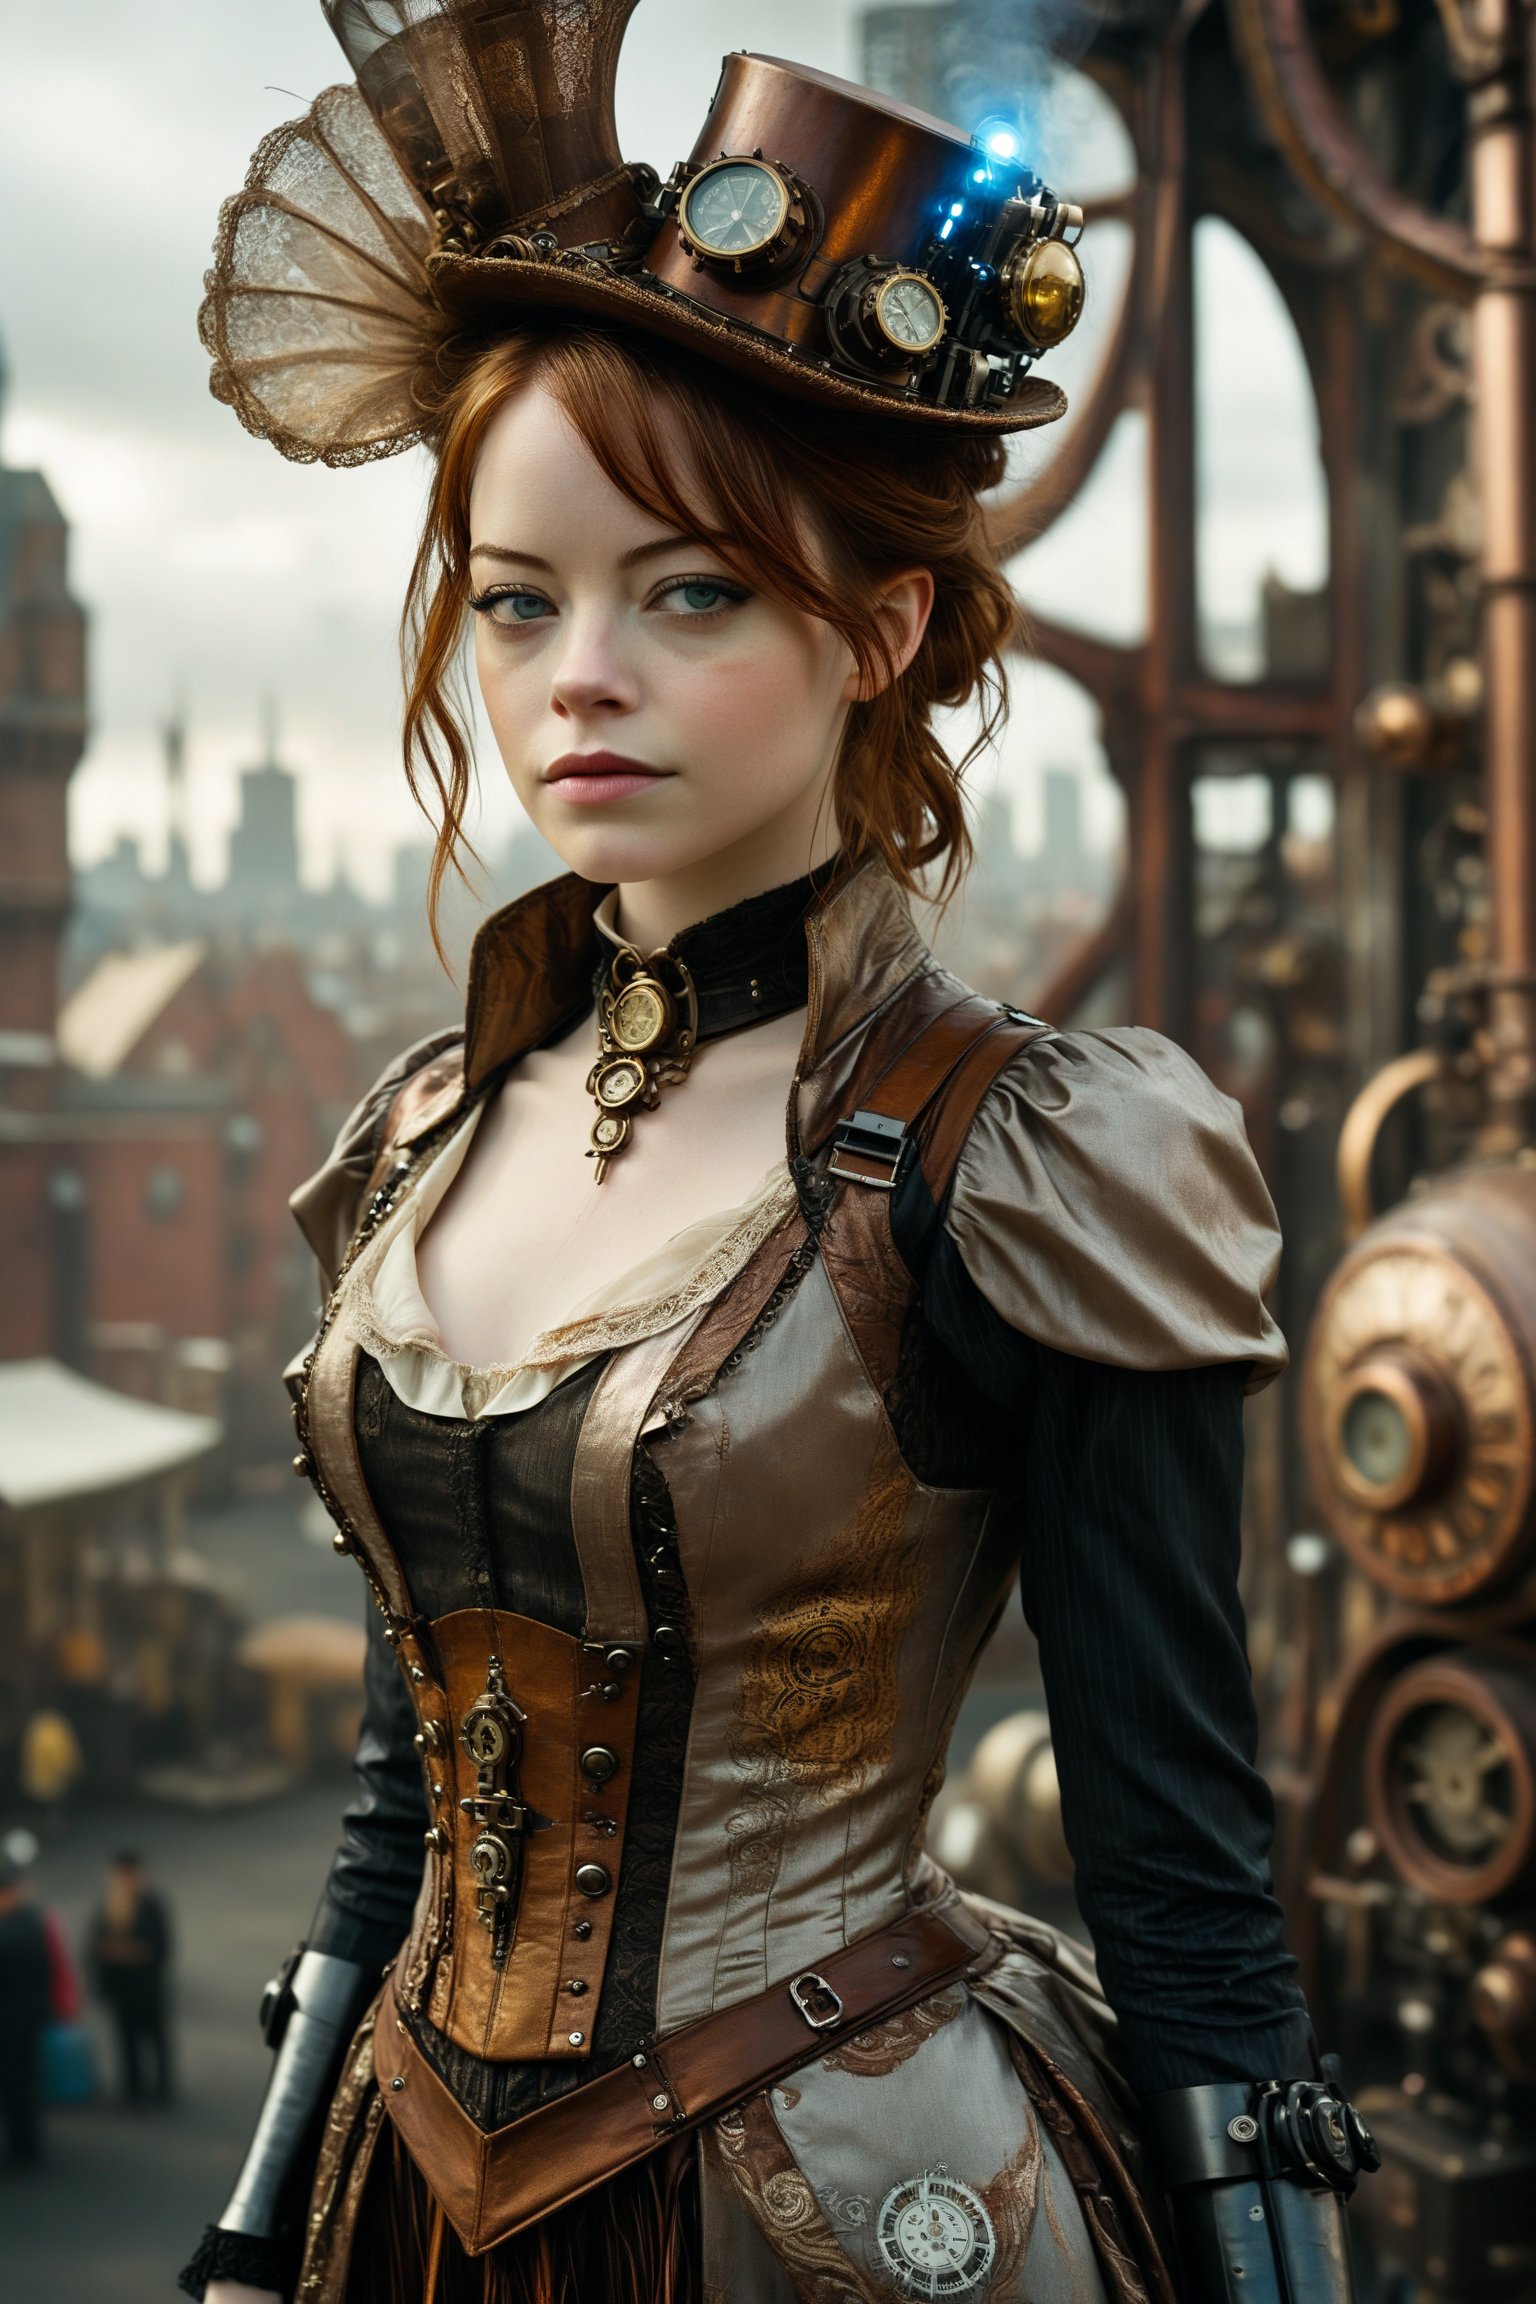 medium shot of 1girl, a beautiful emma stone. she is dressed in an elaborate steampunk outfit. behind her is a steampunk cityscape.